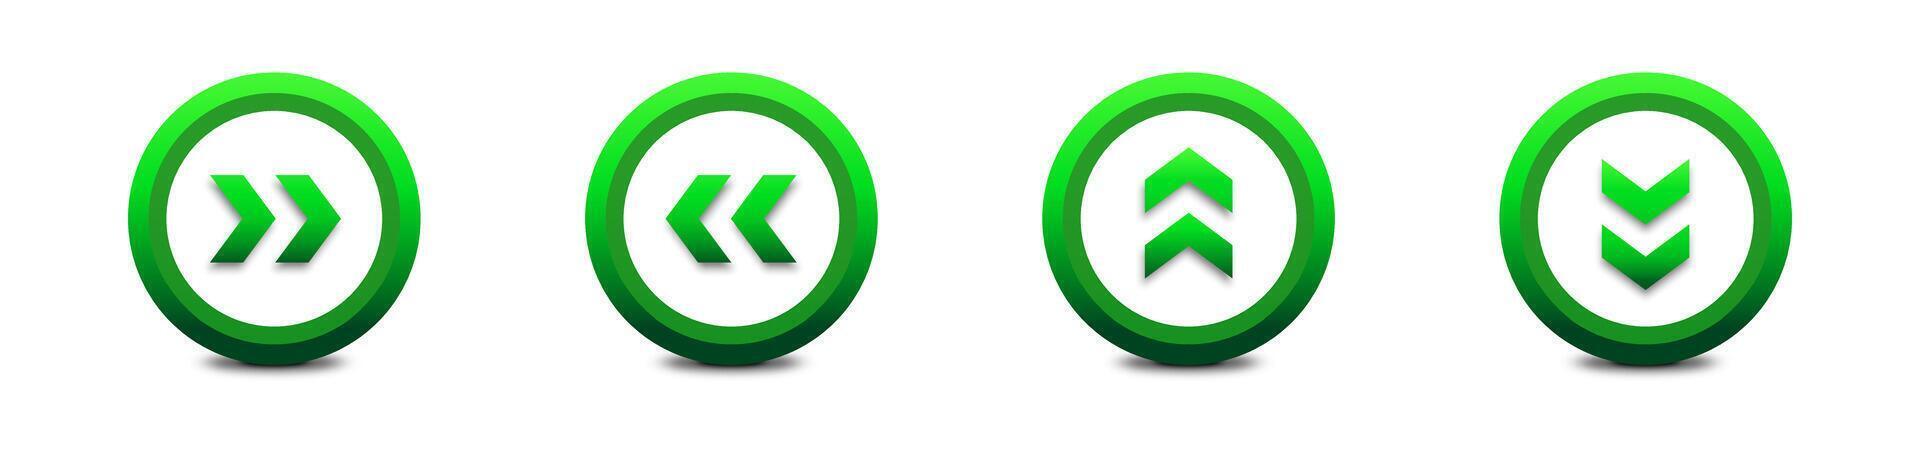 Green arrows set. 3d buttons with shadows. Flat vector illustration.